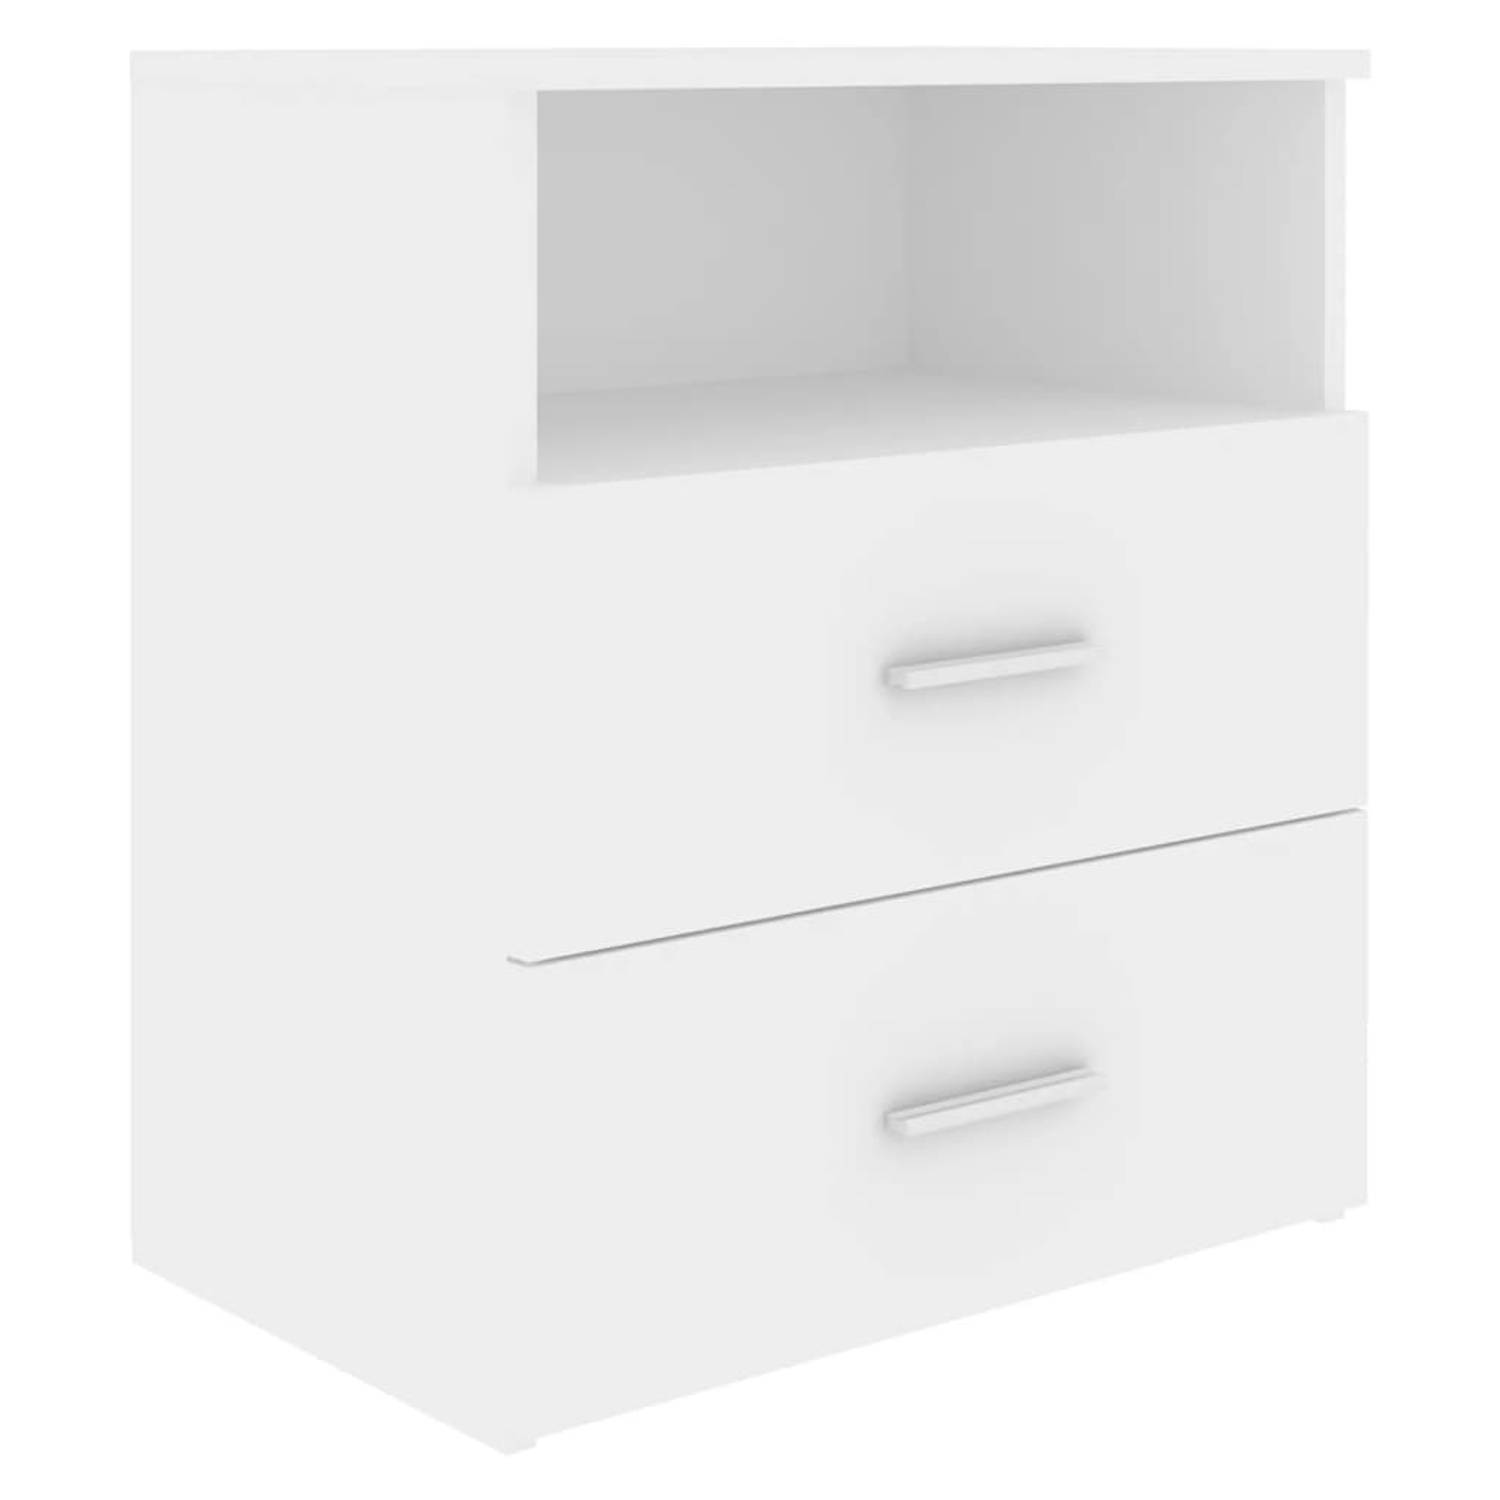 The Living Store Nachtkastje Modern - 2 lades - wit - 50 x 32 x 60 cm